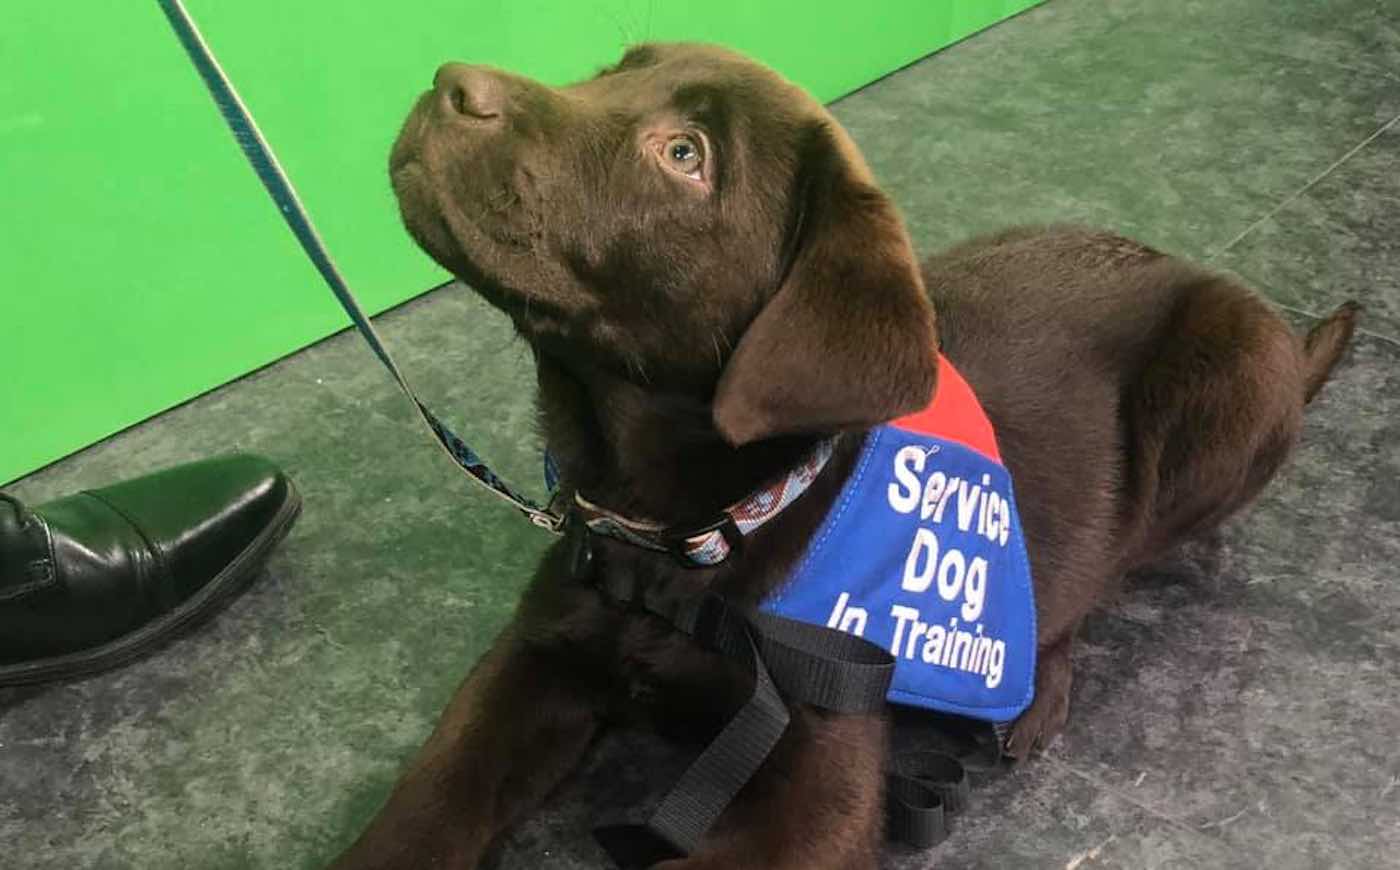 You Can Now Take 'Puppy Pilates' Classes and Help Train Service Dogs for  Veterans With PTSD